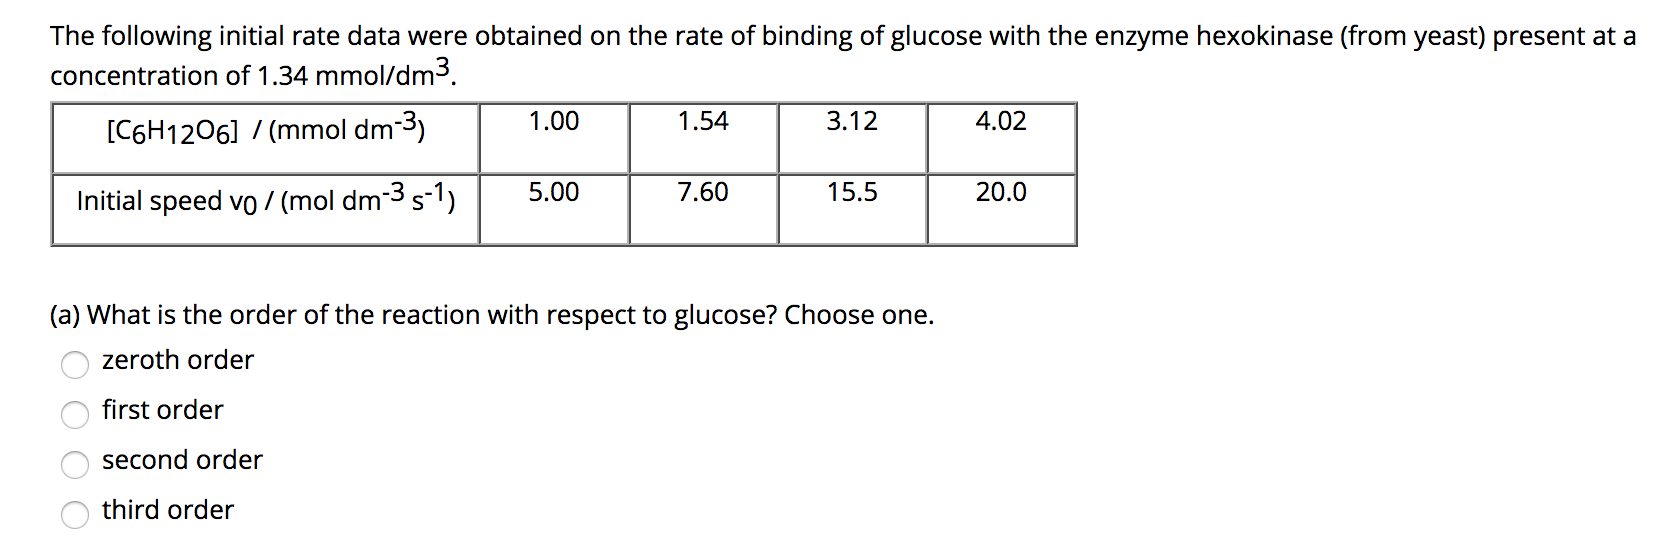 The following initial rate data were obtained on the rate of binding of glucose with the enzyme hexokinase (from yeast) present at a
concentration of 1.34 mmol/dm3.
1.00
1.54
3.12
4.02
[C6H1206] / (mmol dm 3)
5.00
7.60
15.5
20.0
Initial speed vo / (mol dm-3 s-1)
(a) What is the order of the reaction with respect to glucose? Choose one.
zeroth order
first order
second order
third order
